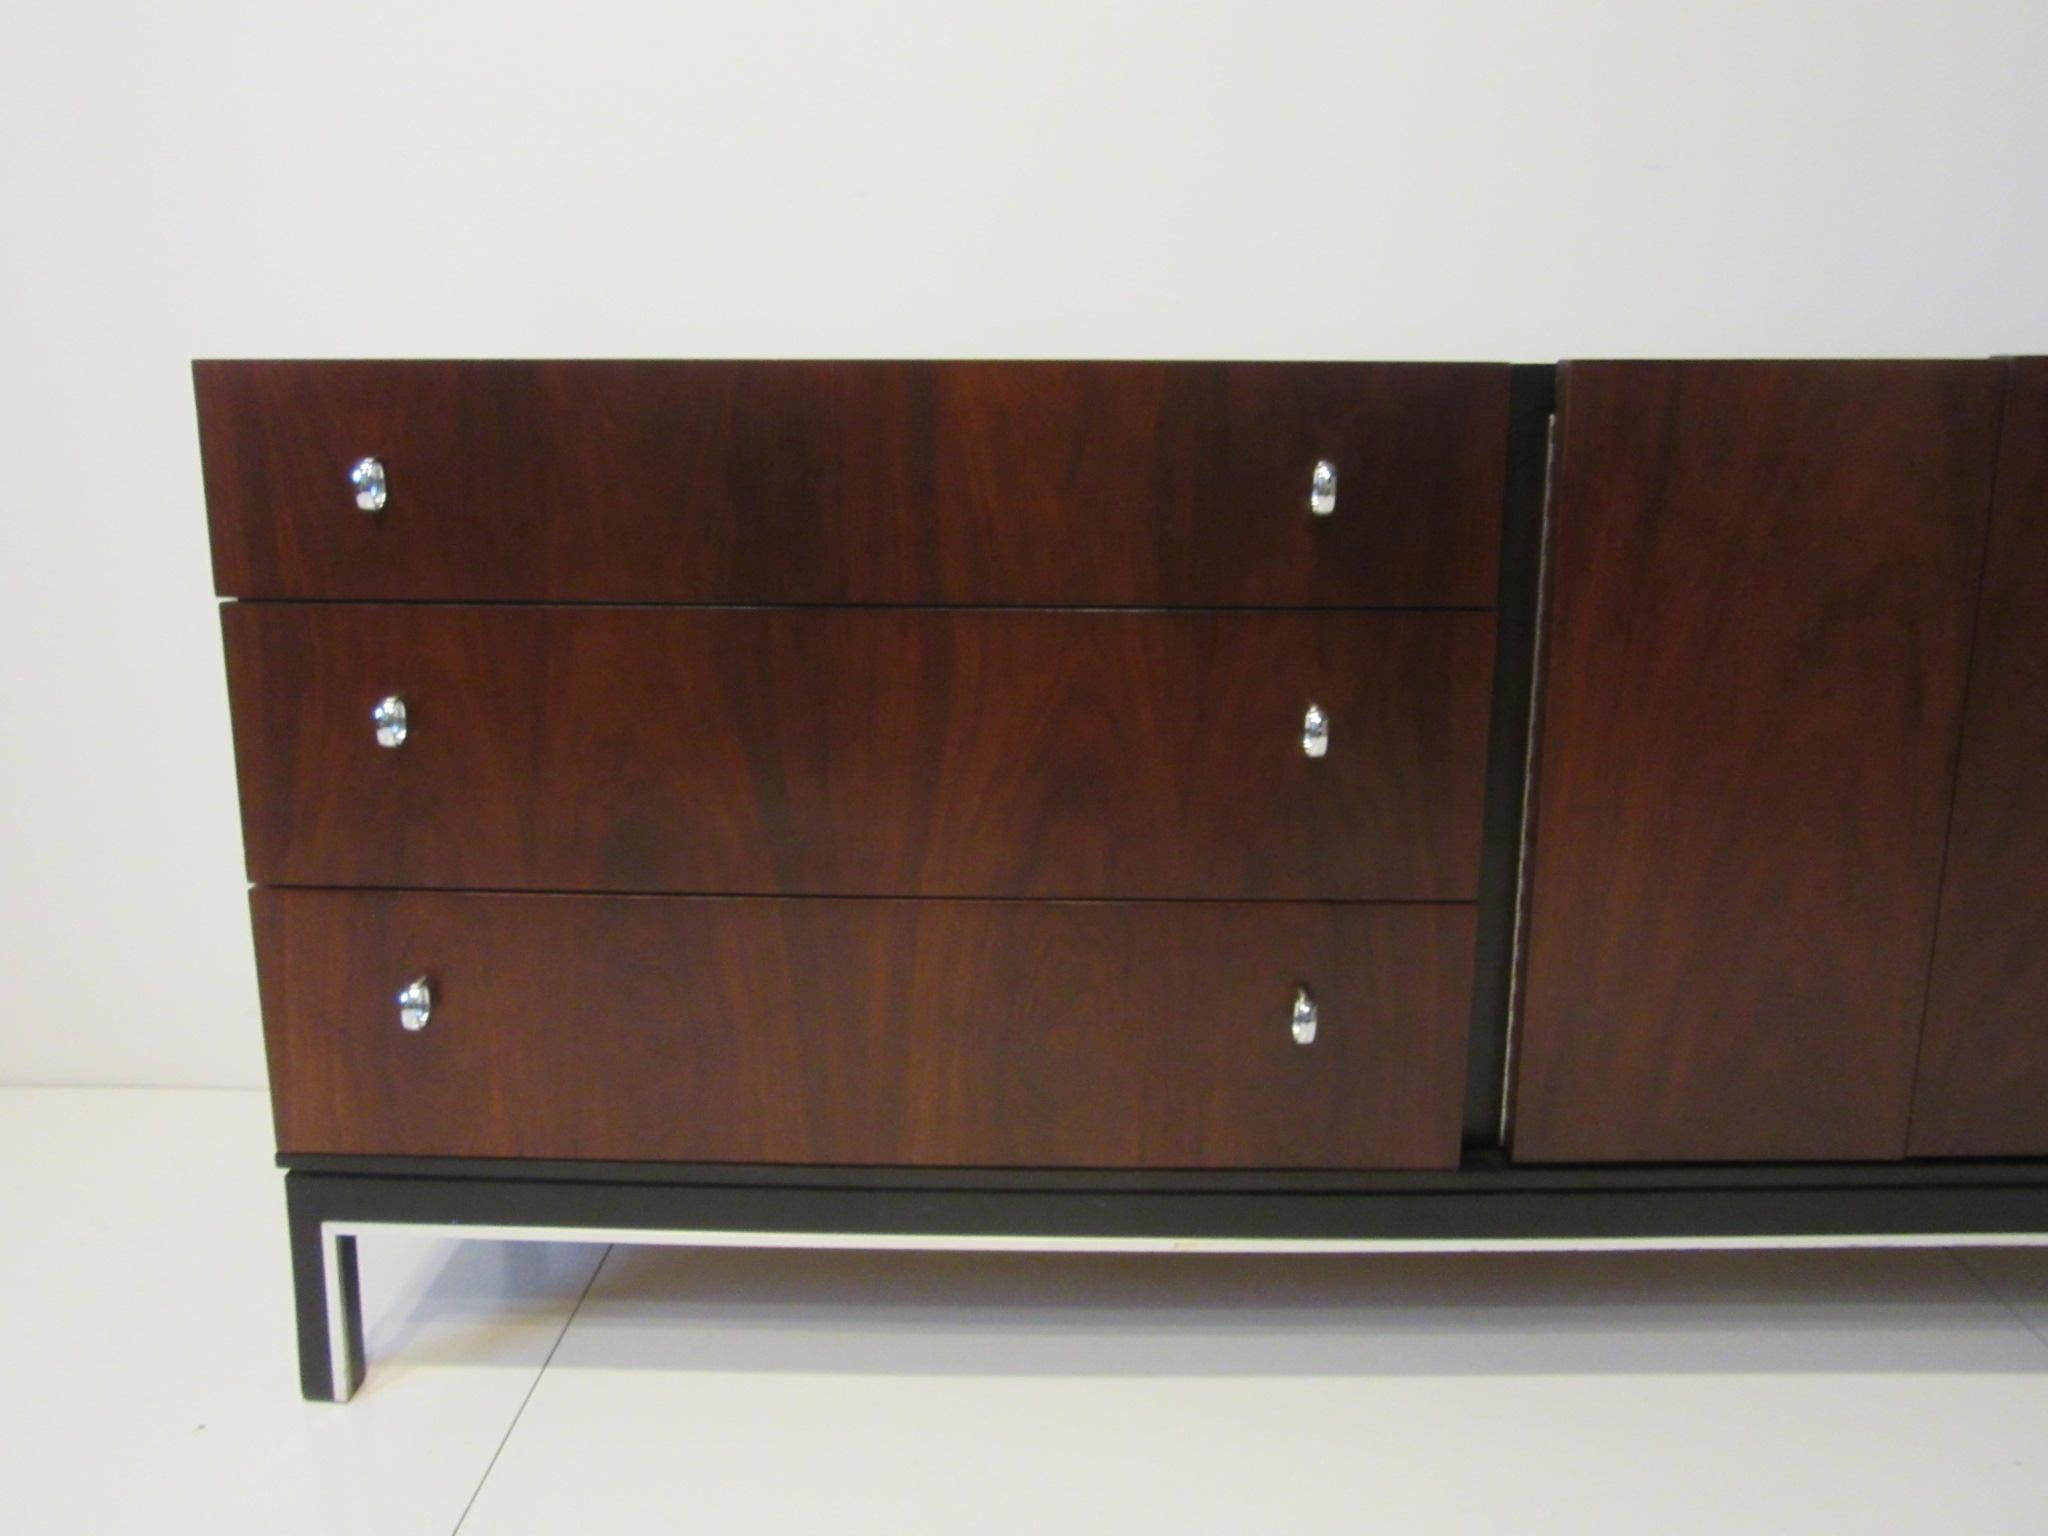 A richly grained rosewood and ebony toned dresser / credenza with tri fold doors revealing three drawers and the other side having three drawers with chrome pulls. The stretcher and leg area is detailed with an aluminum strip giving the piece a very